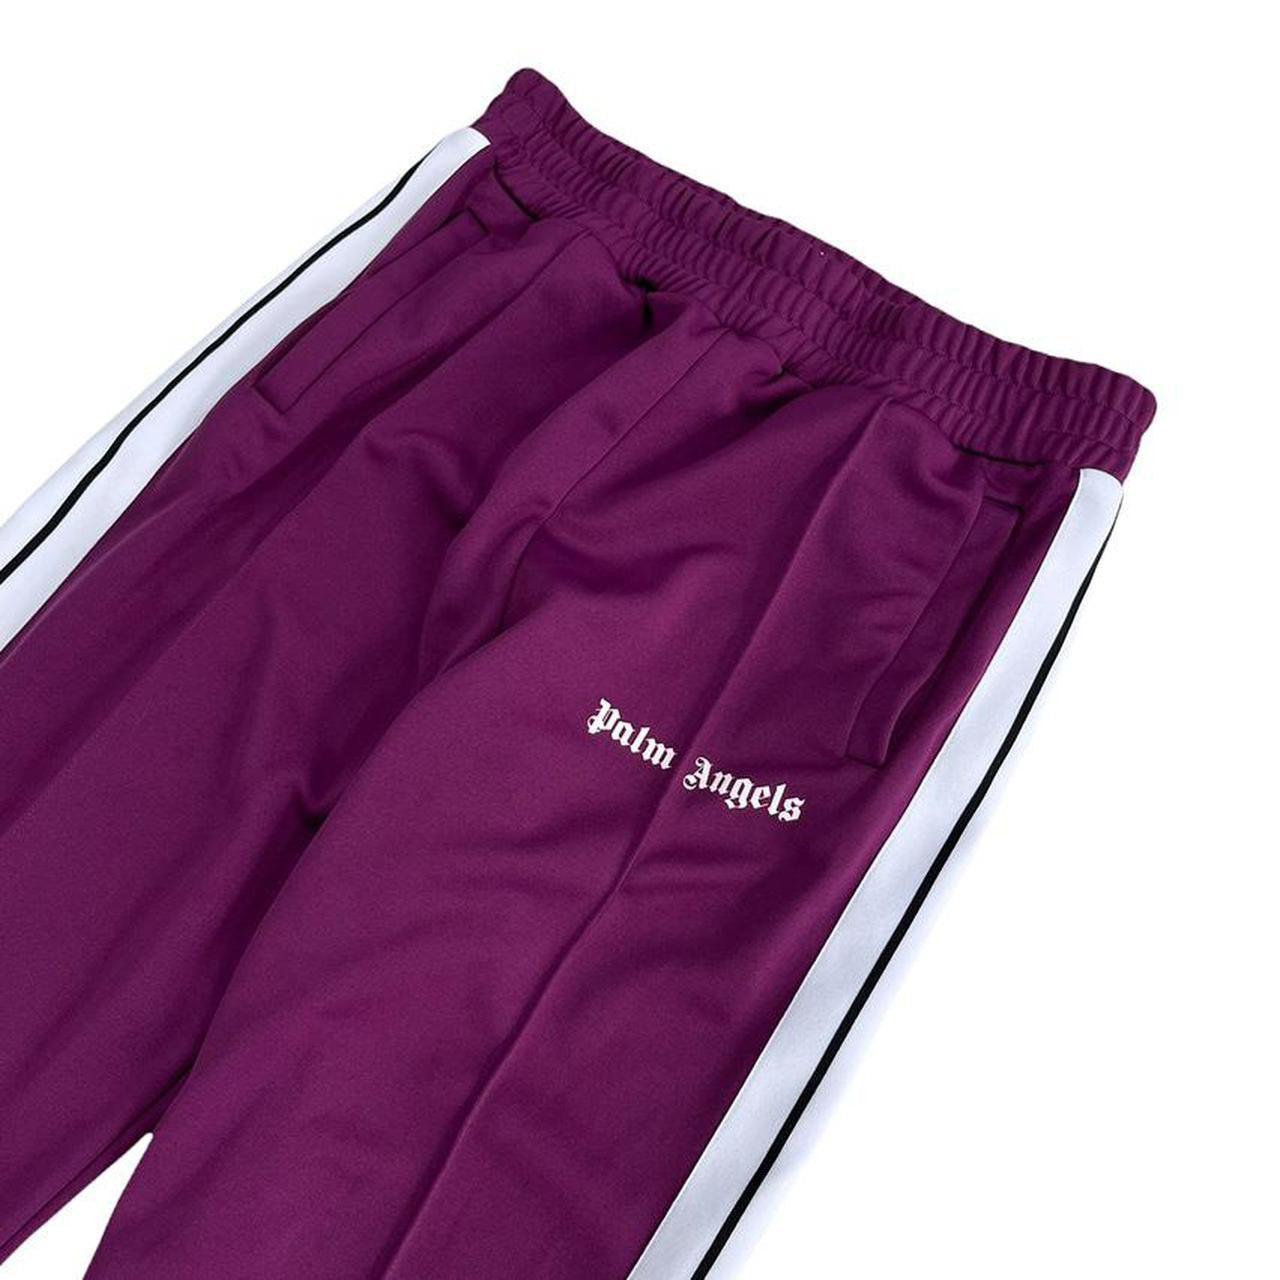 Palm Angels burgundy side stripe track pants - Known Source